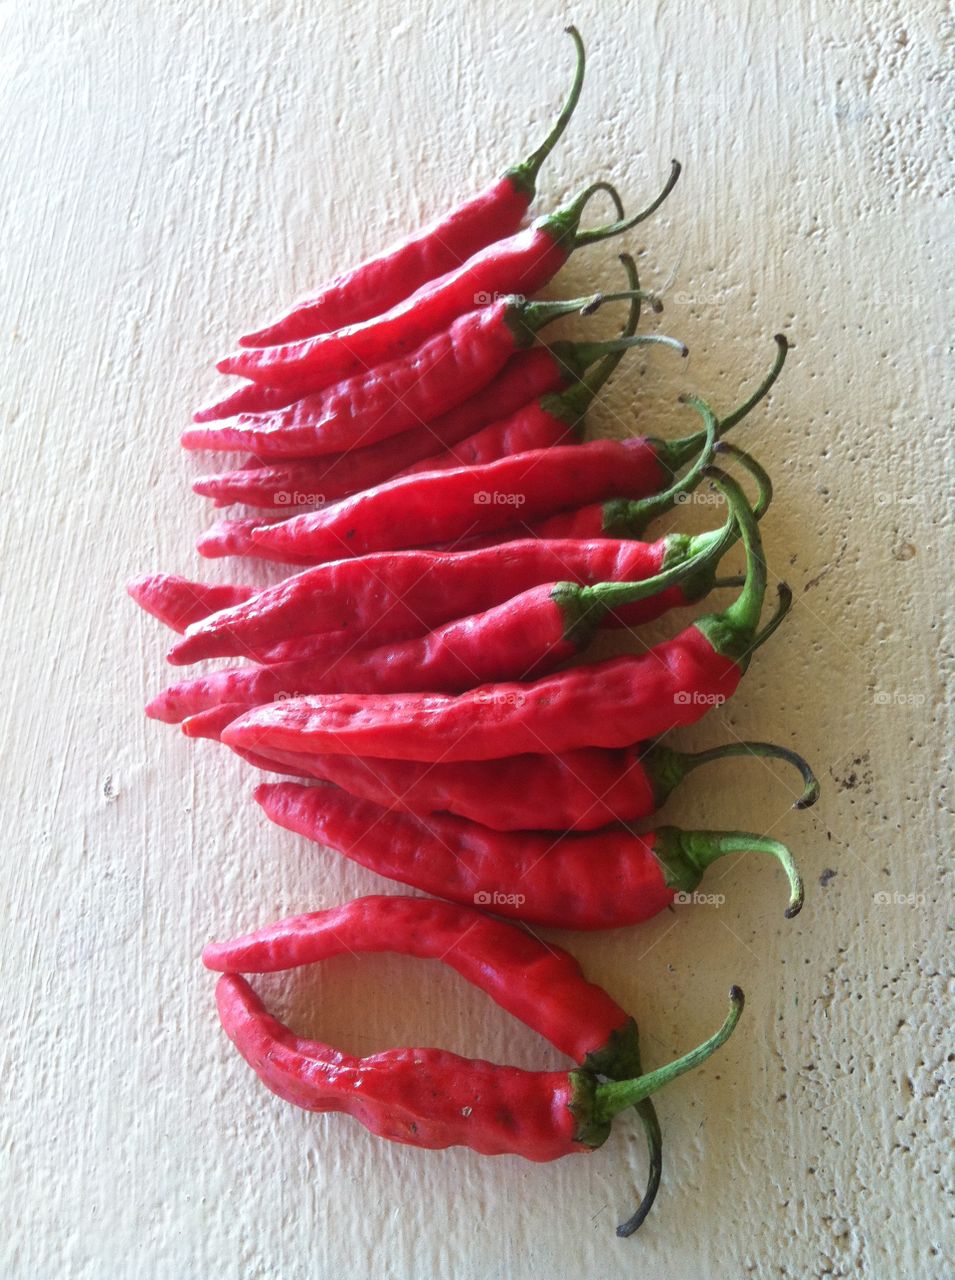 Chilli peppers . Chilli peppers hot hot